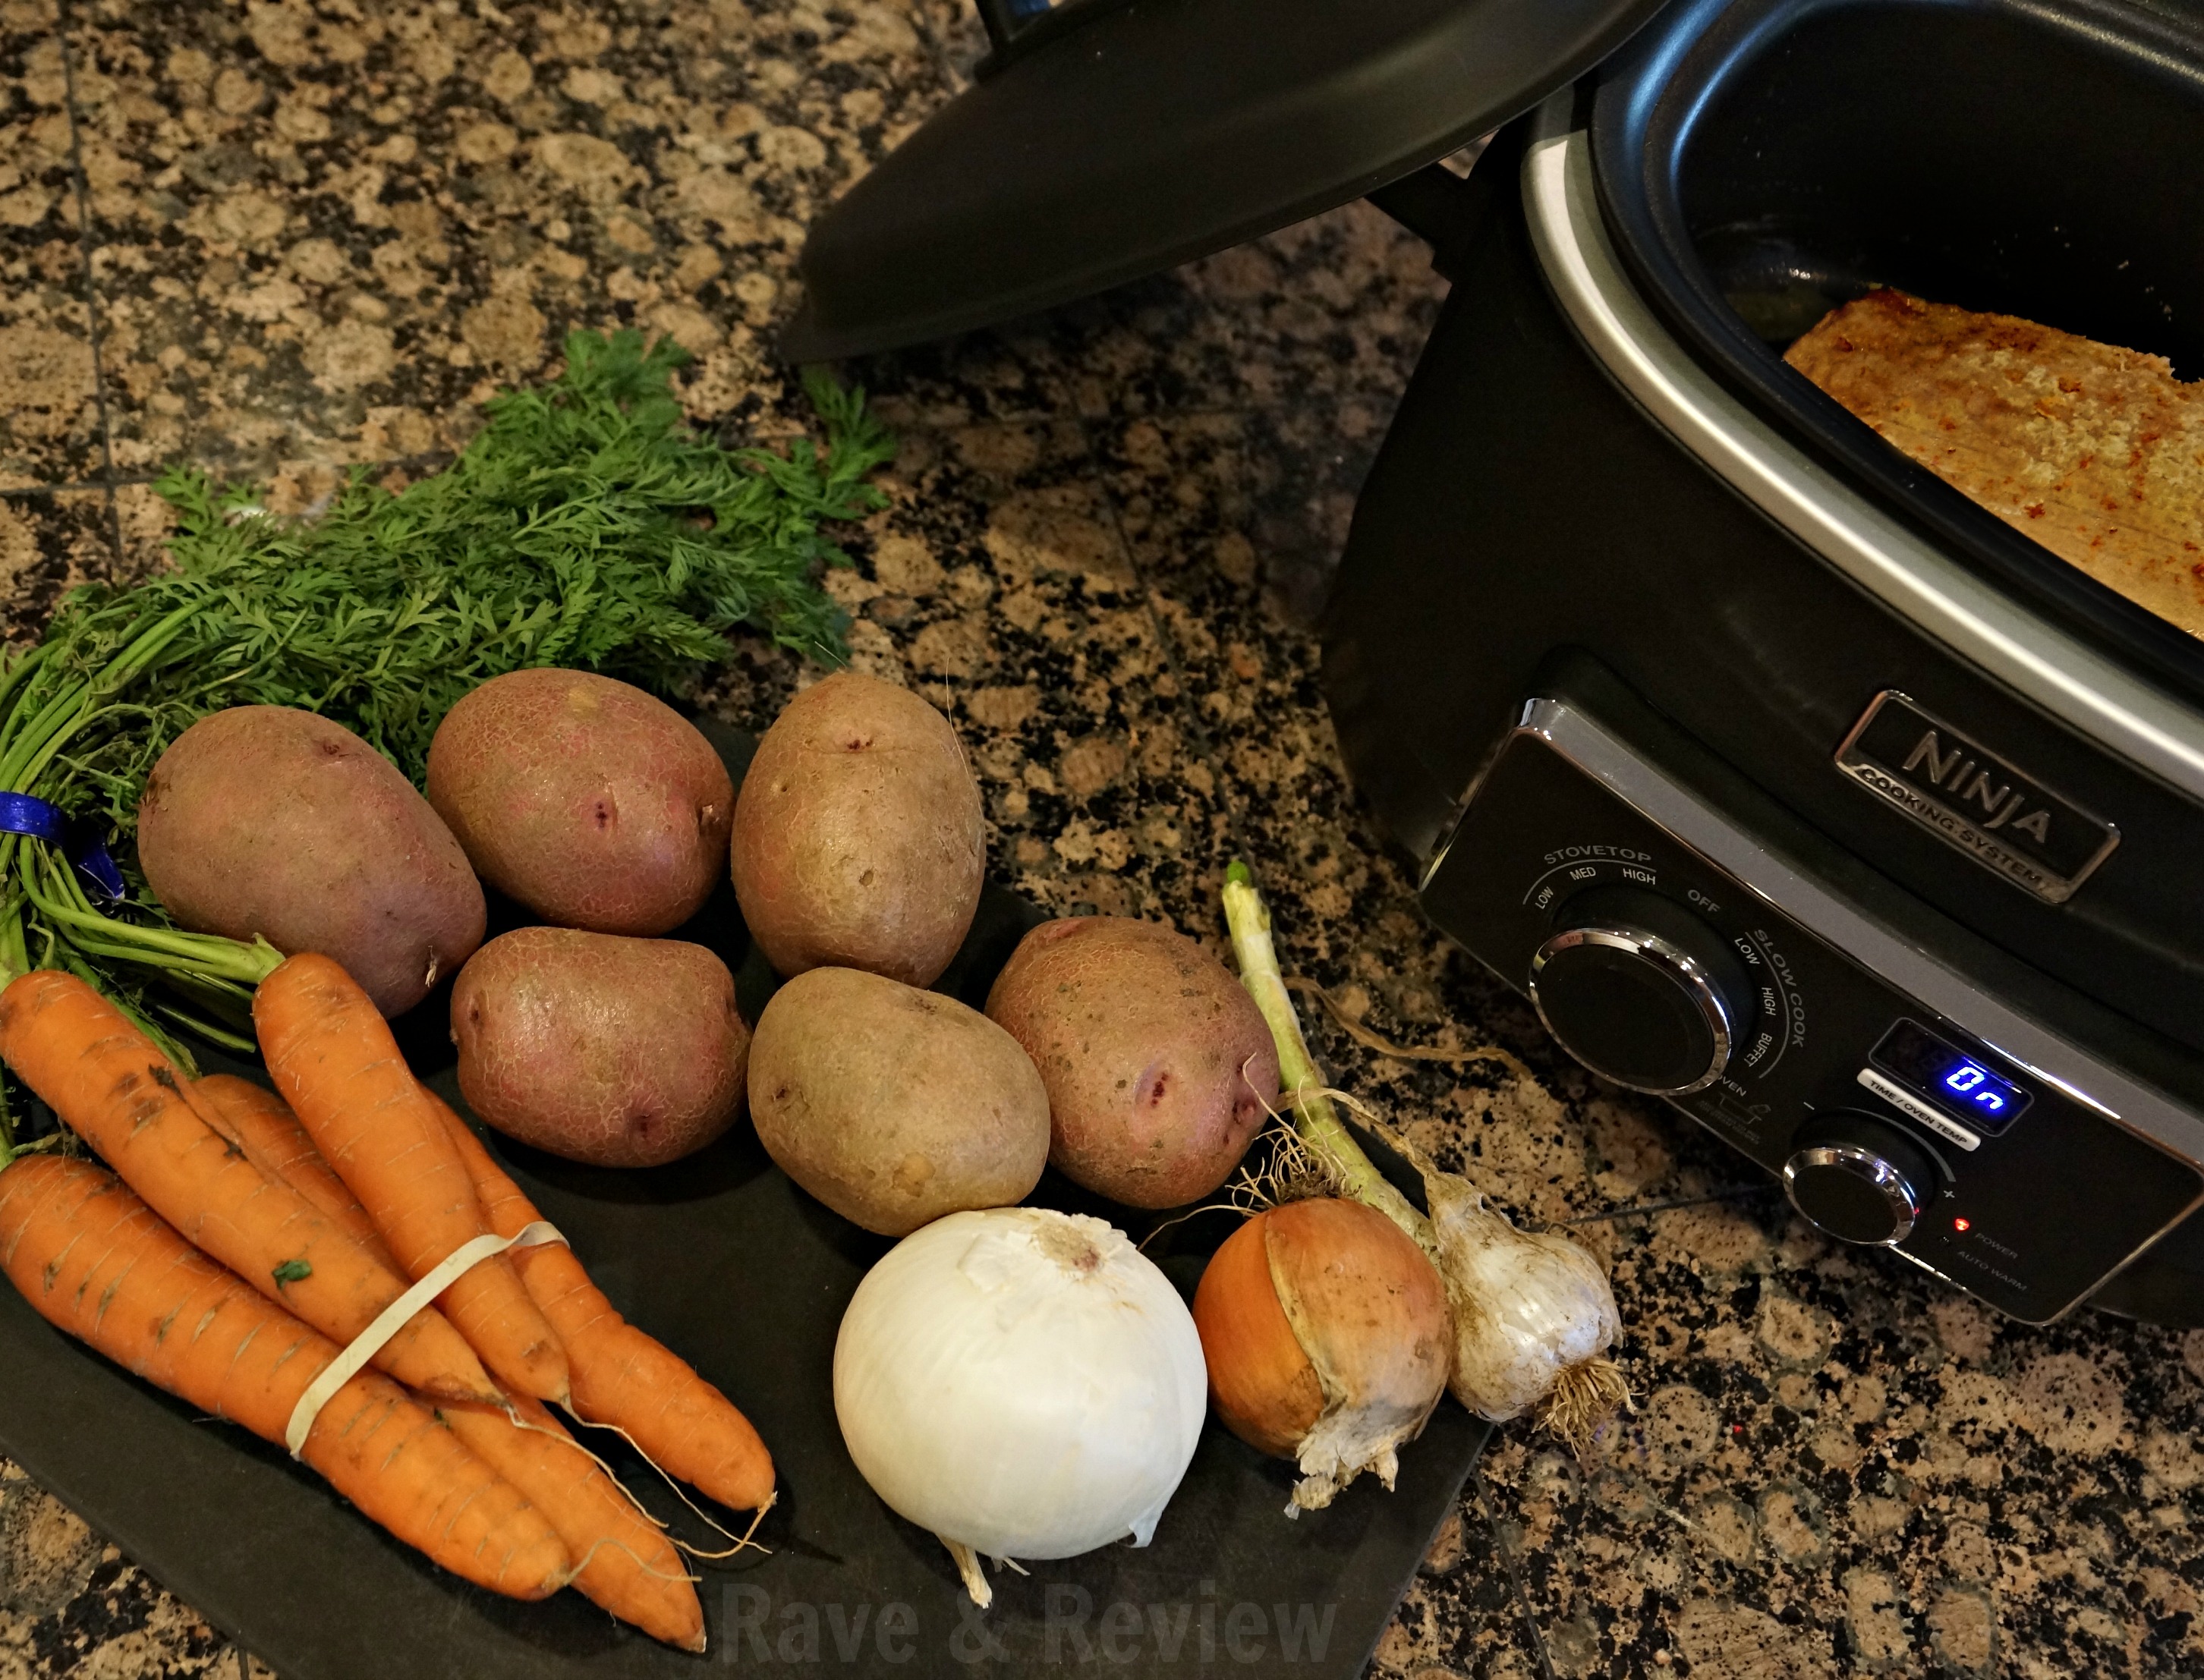 Why I love the Ninja 3-in-1 cooking system